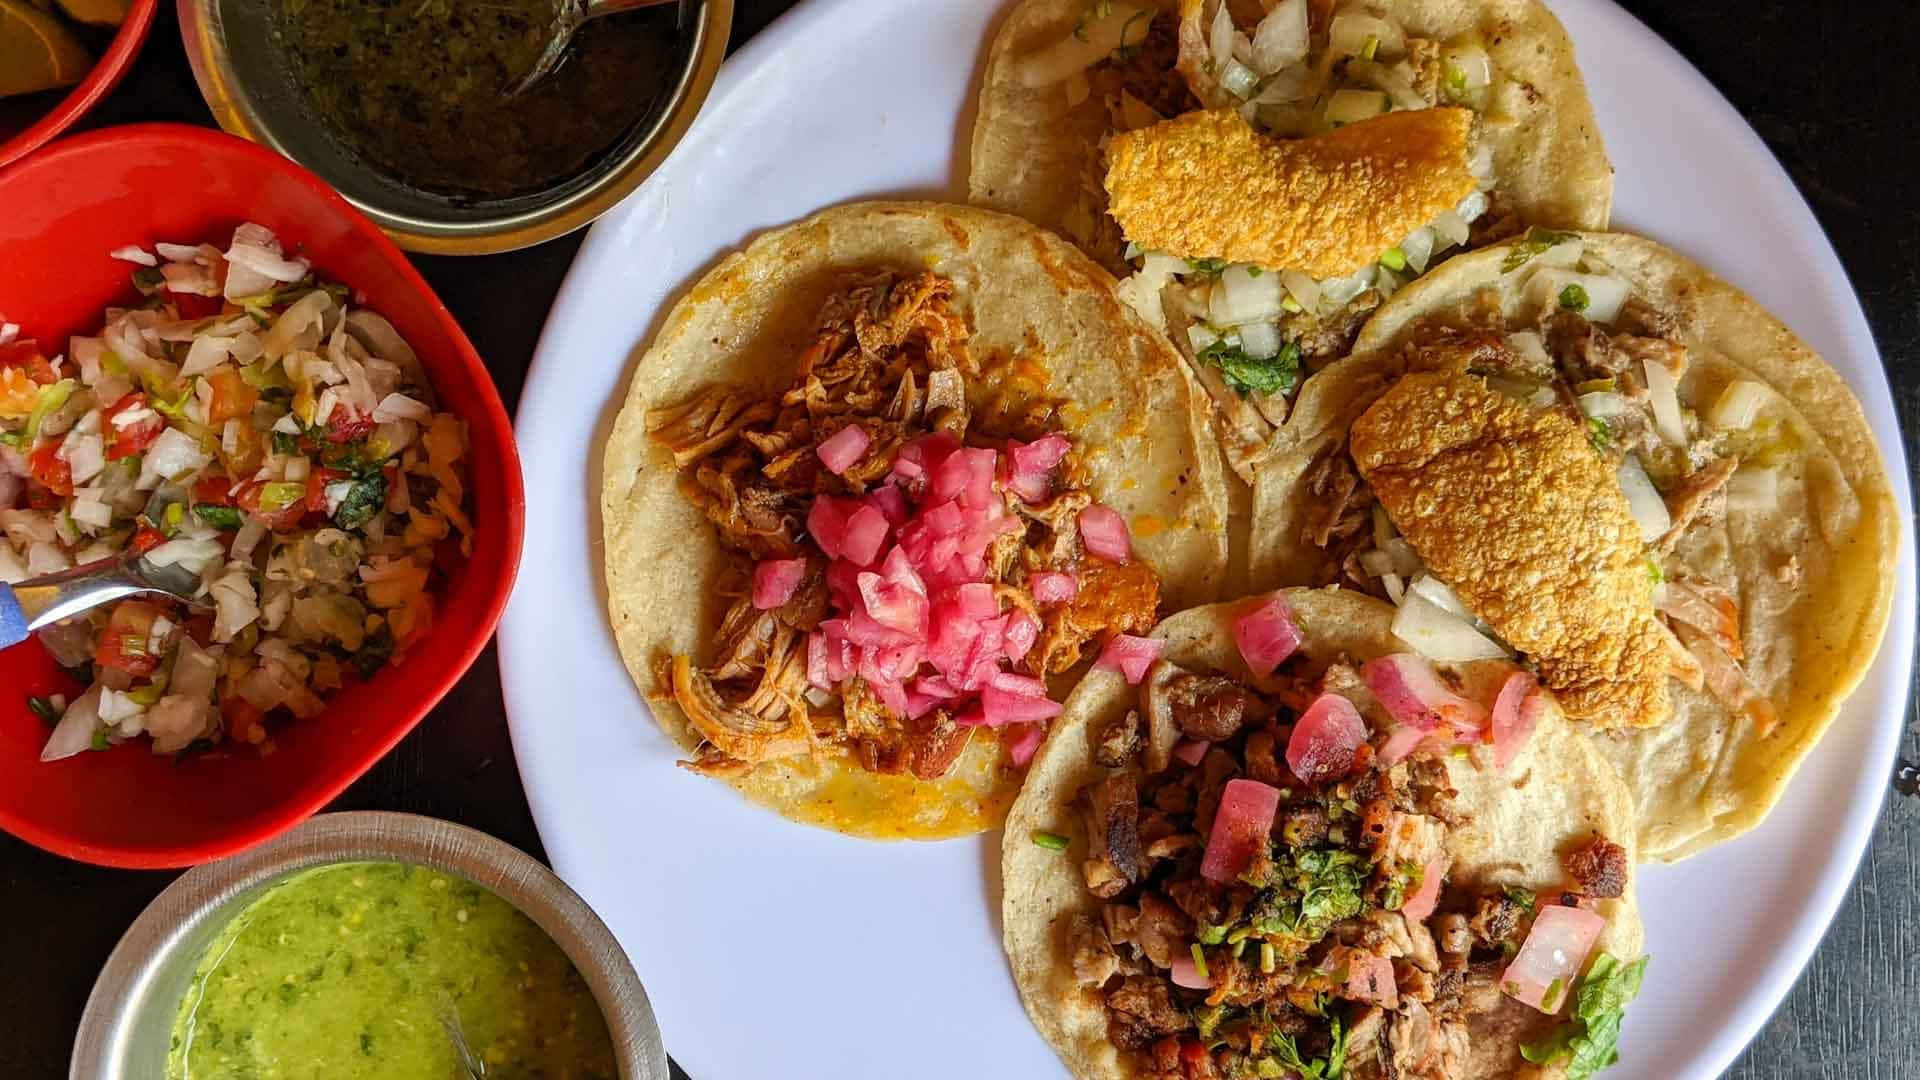 A Plate Of Tacos And Other Food On A Table